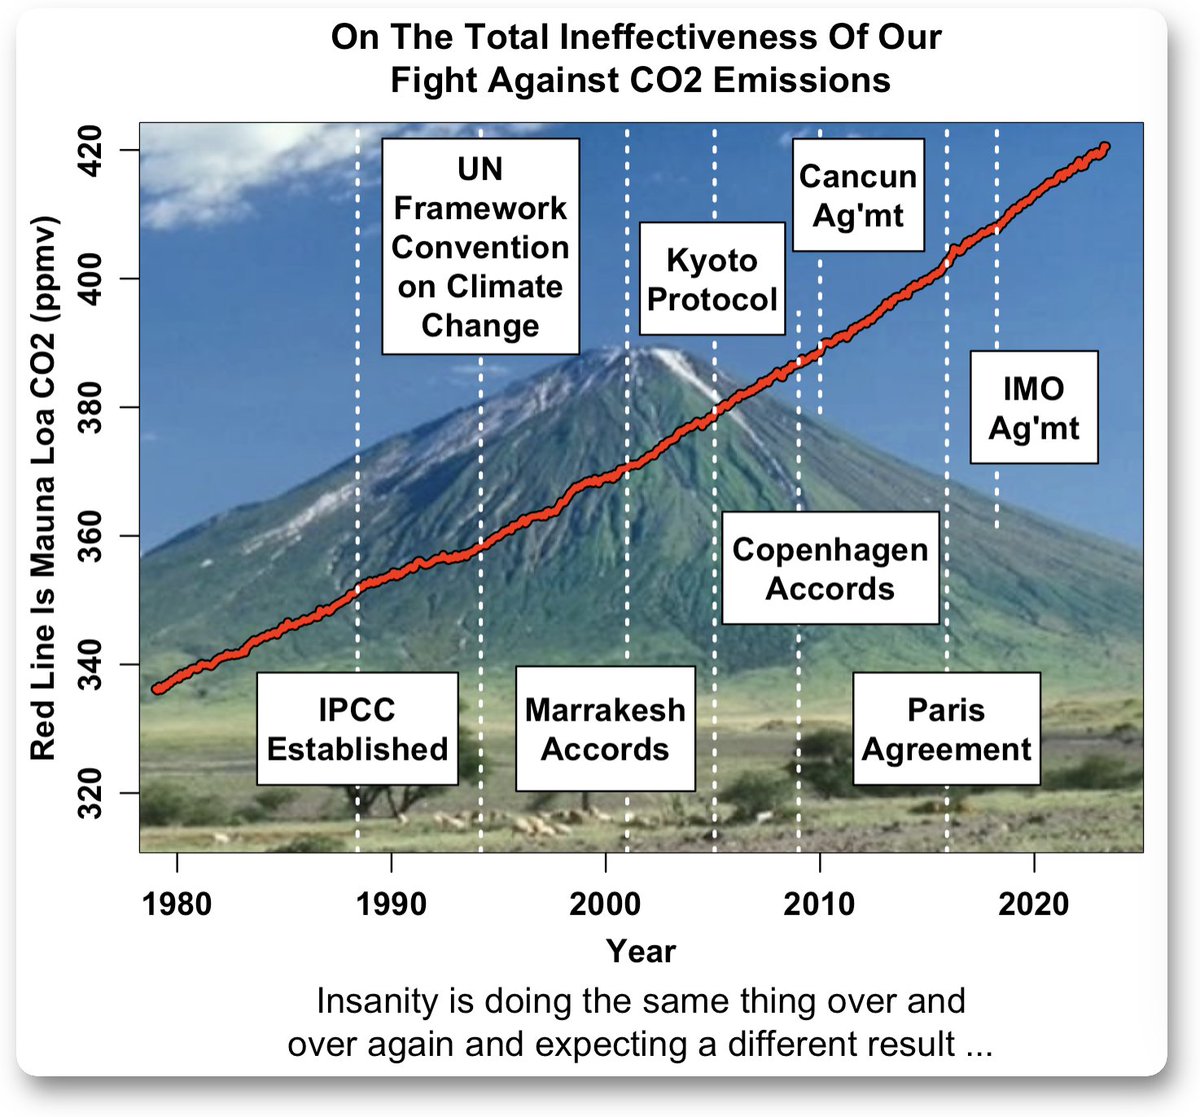 VoT, please point out the 'climate progress we have made' on this graph of atmospheric CO2 levels. Thanks, w.